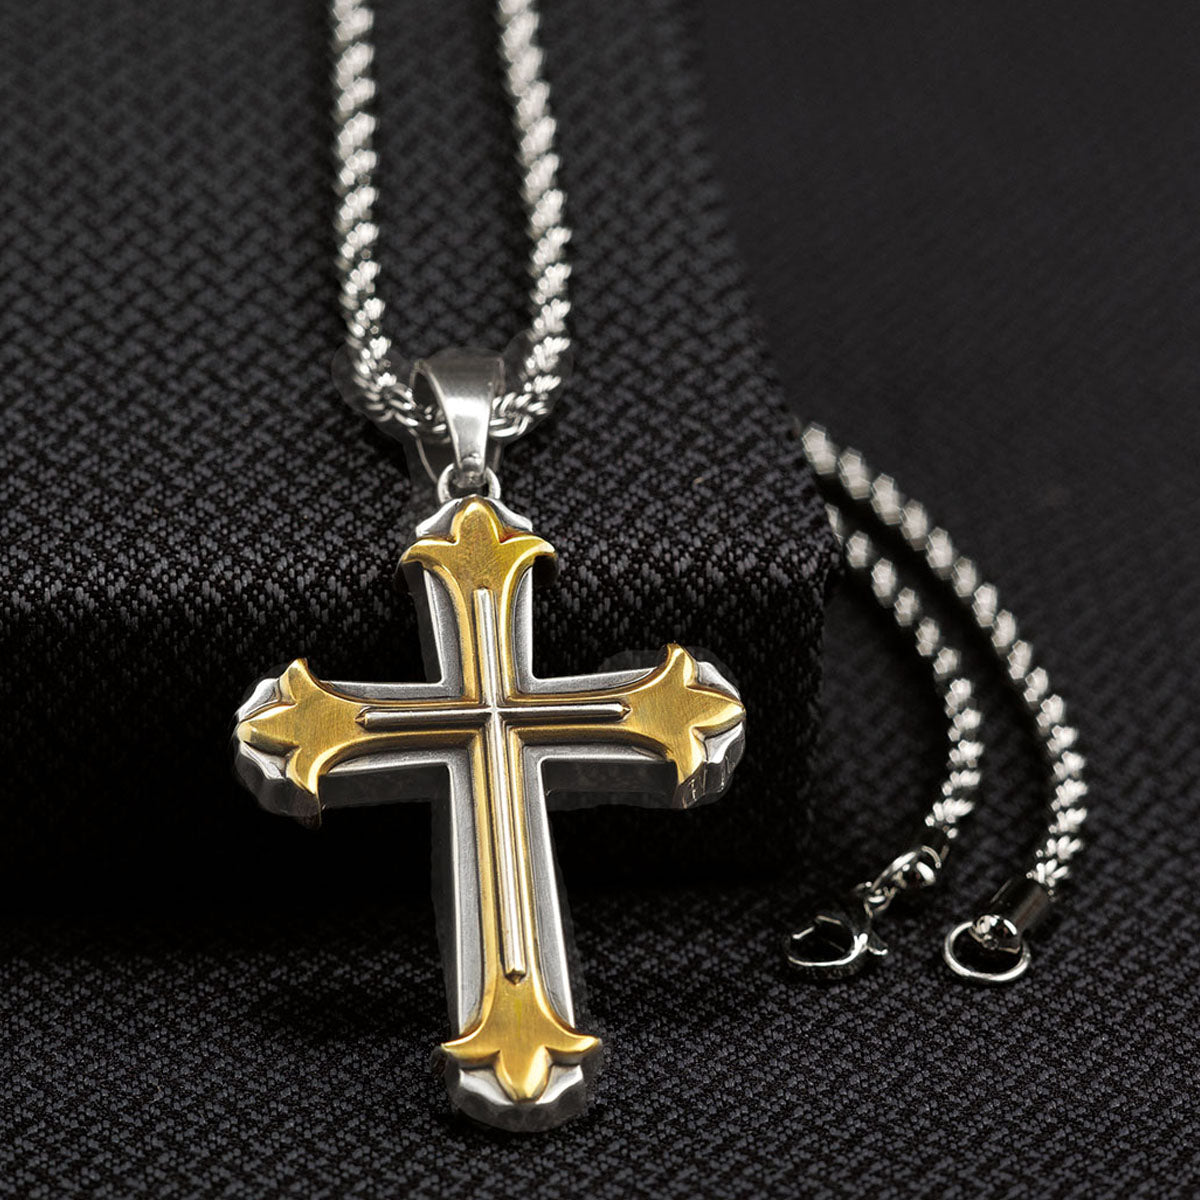 Twister Men's 24" Cross Necklace - Gold/Silver